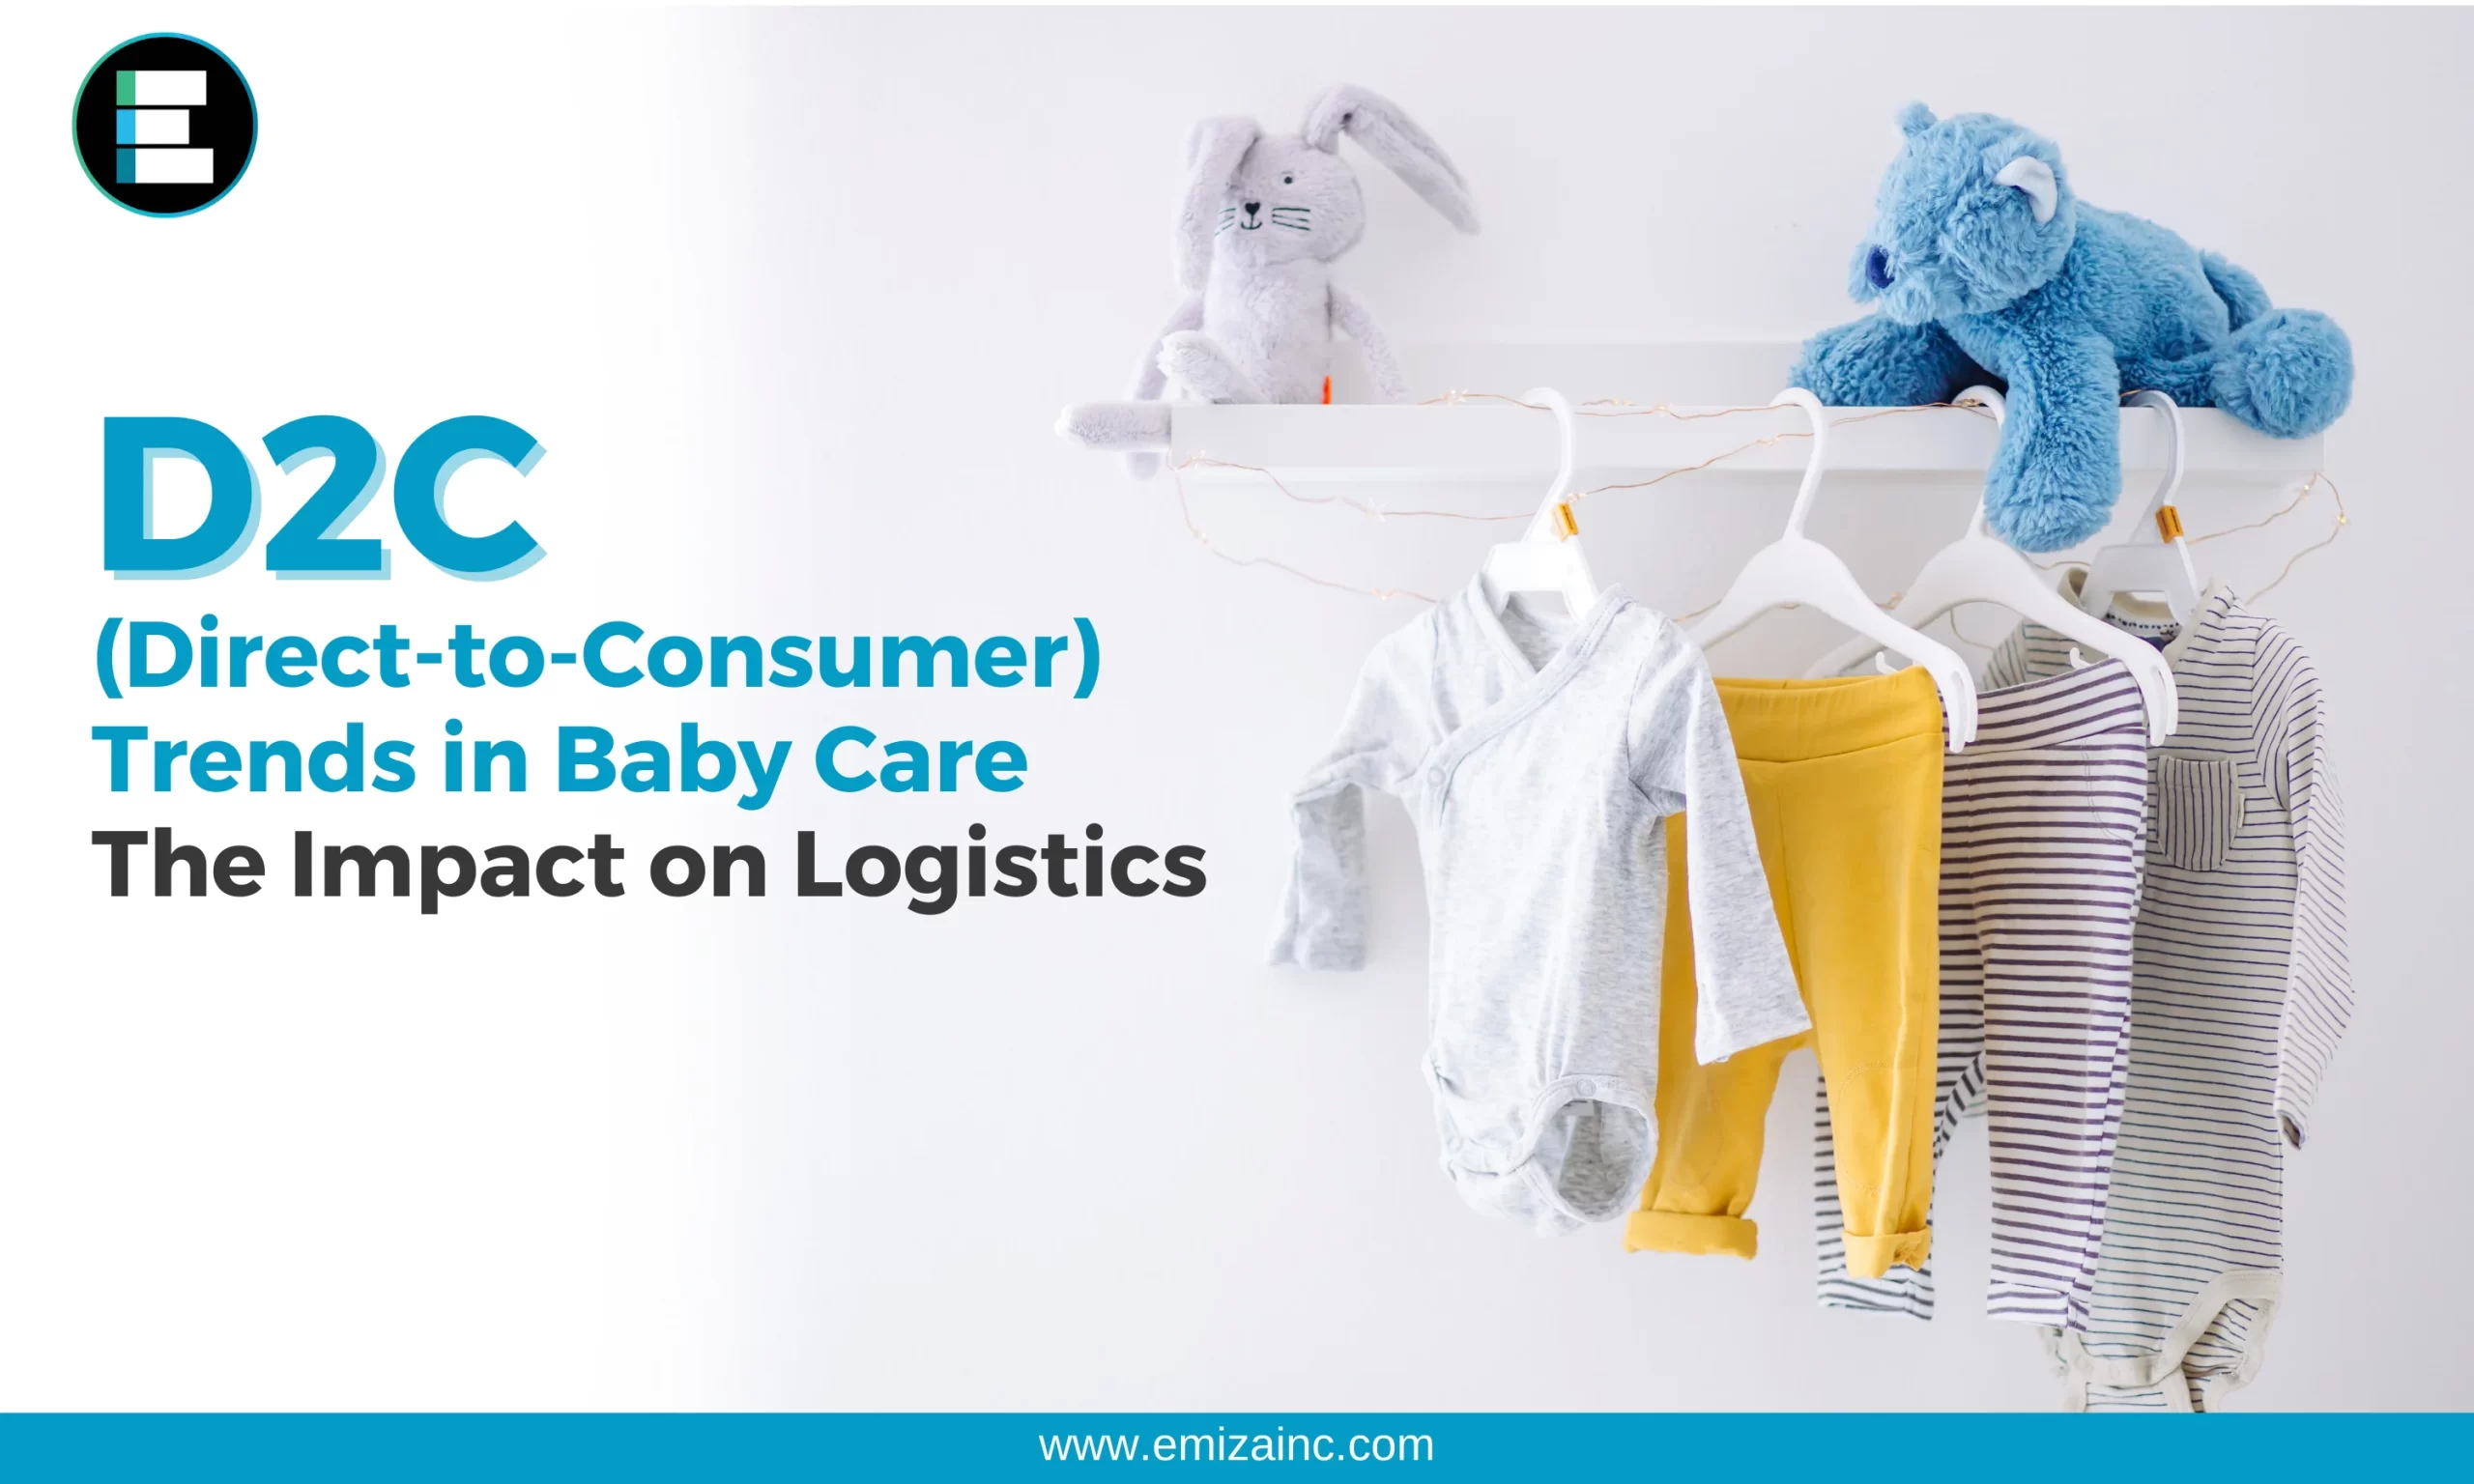 D2C (Direct-to-Consumer) Trends in Baby Care: The Impact on Logistics in India